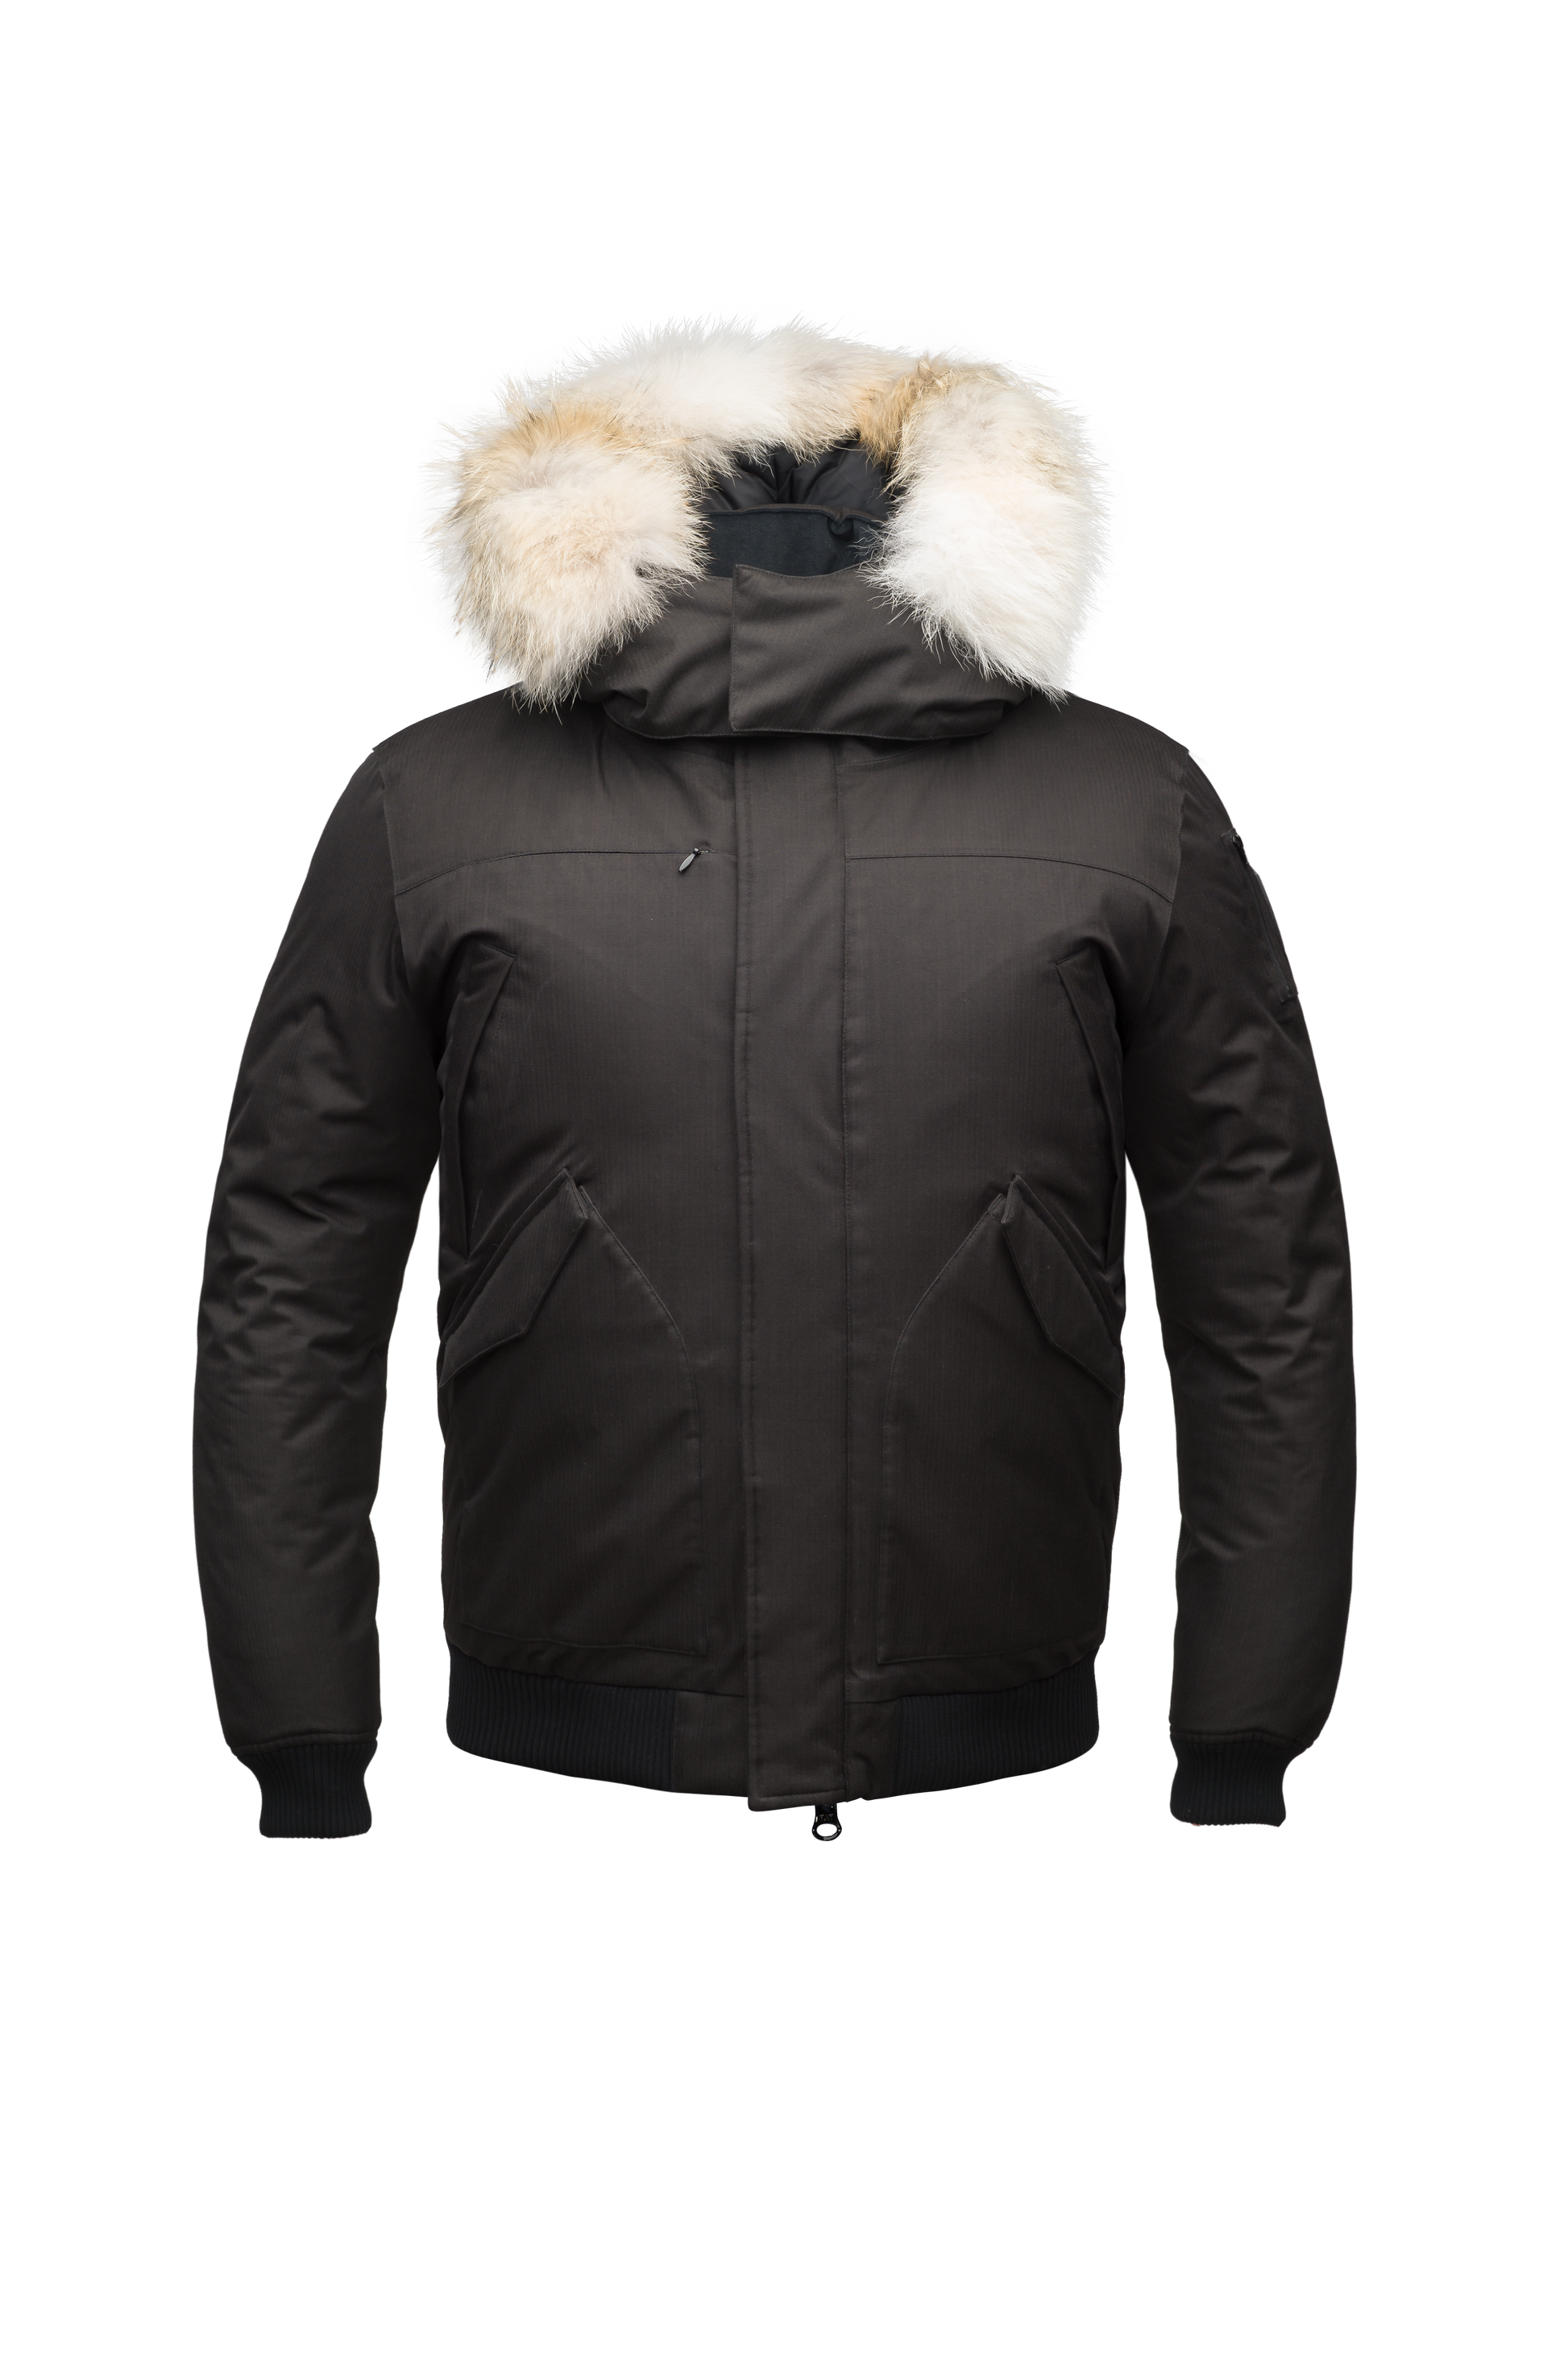 Men's classic down filled bomber jacket with a down filled hood that features a removable coyote fur trim and concealed moldable framing wire in Black